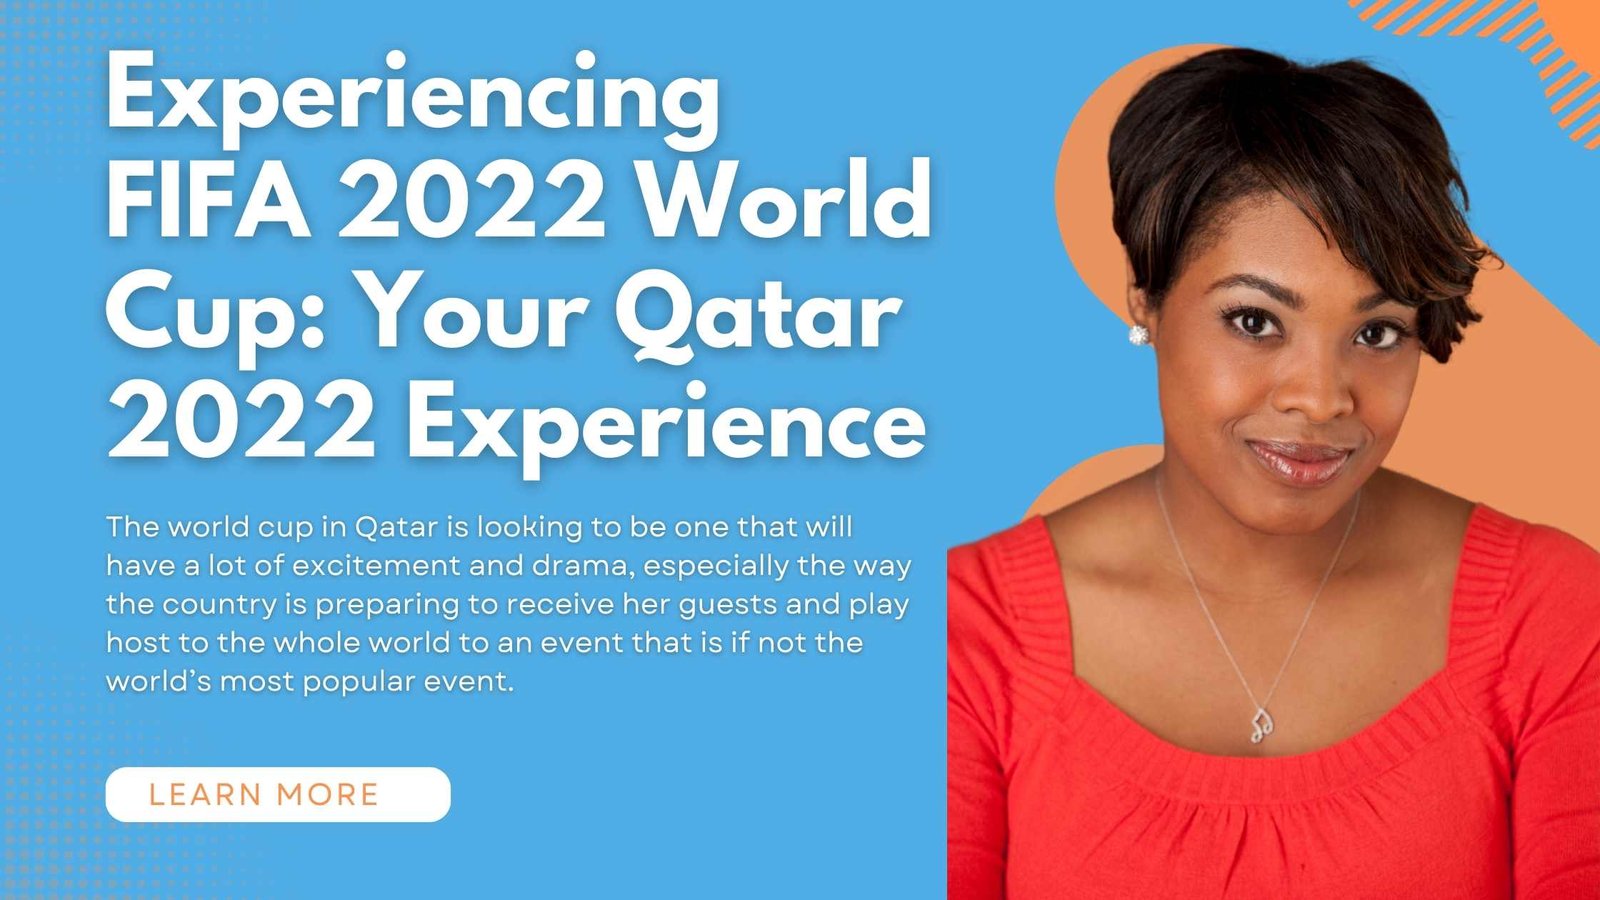 Experiencing FIFA 2022 World Cup: Your Qatar 2022 Experience